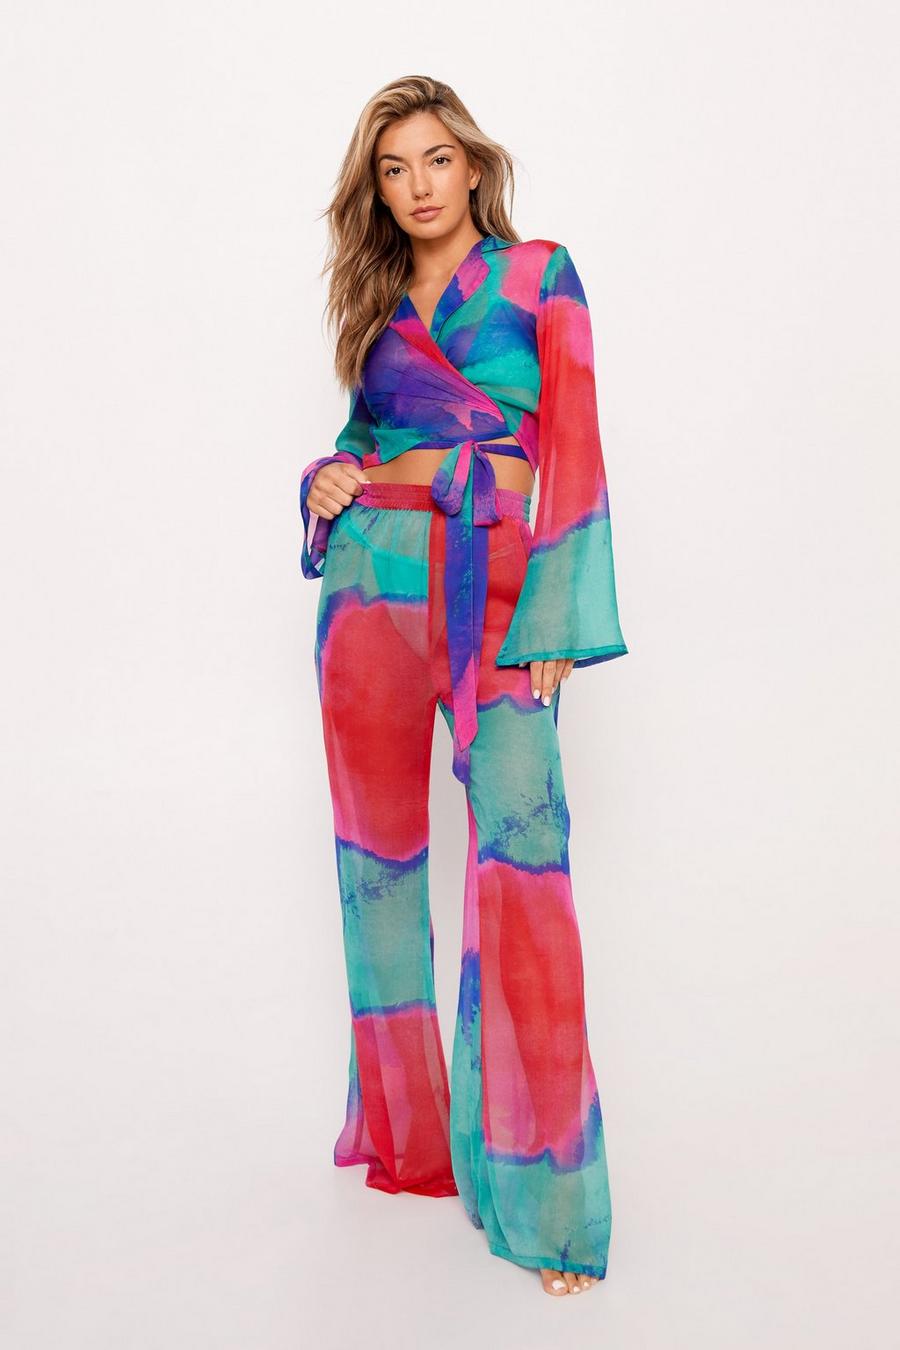 Blurred Tie Dye Chiffon Wide Leg Cover Up Trousers